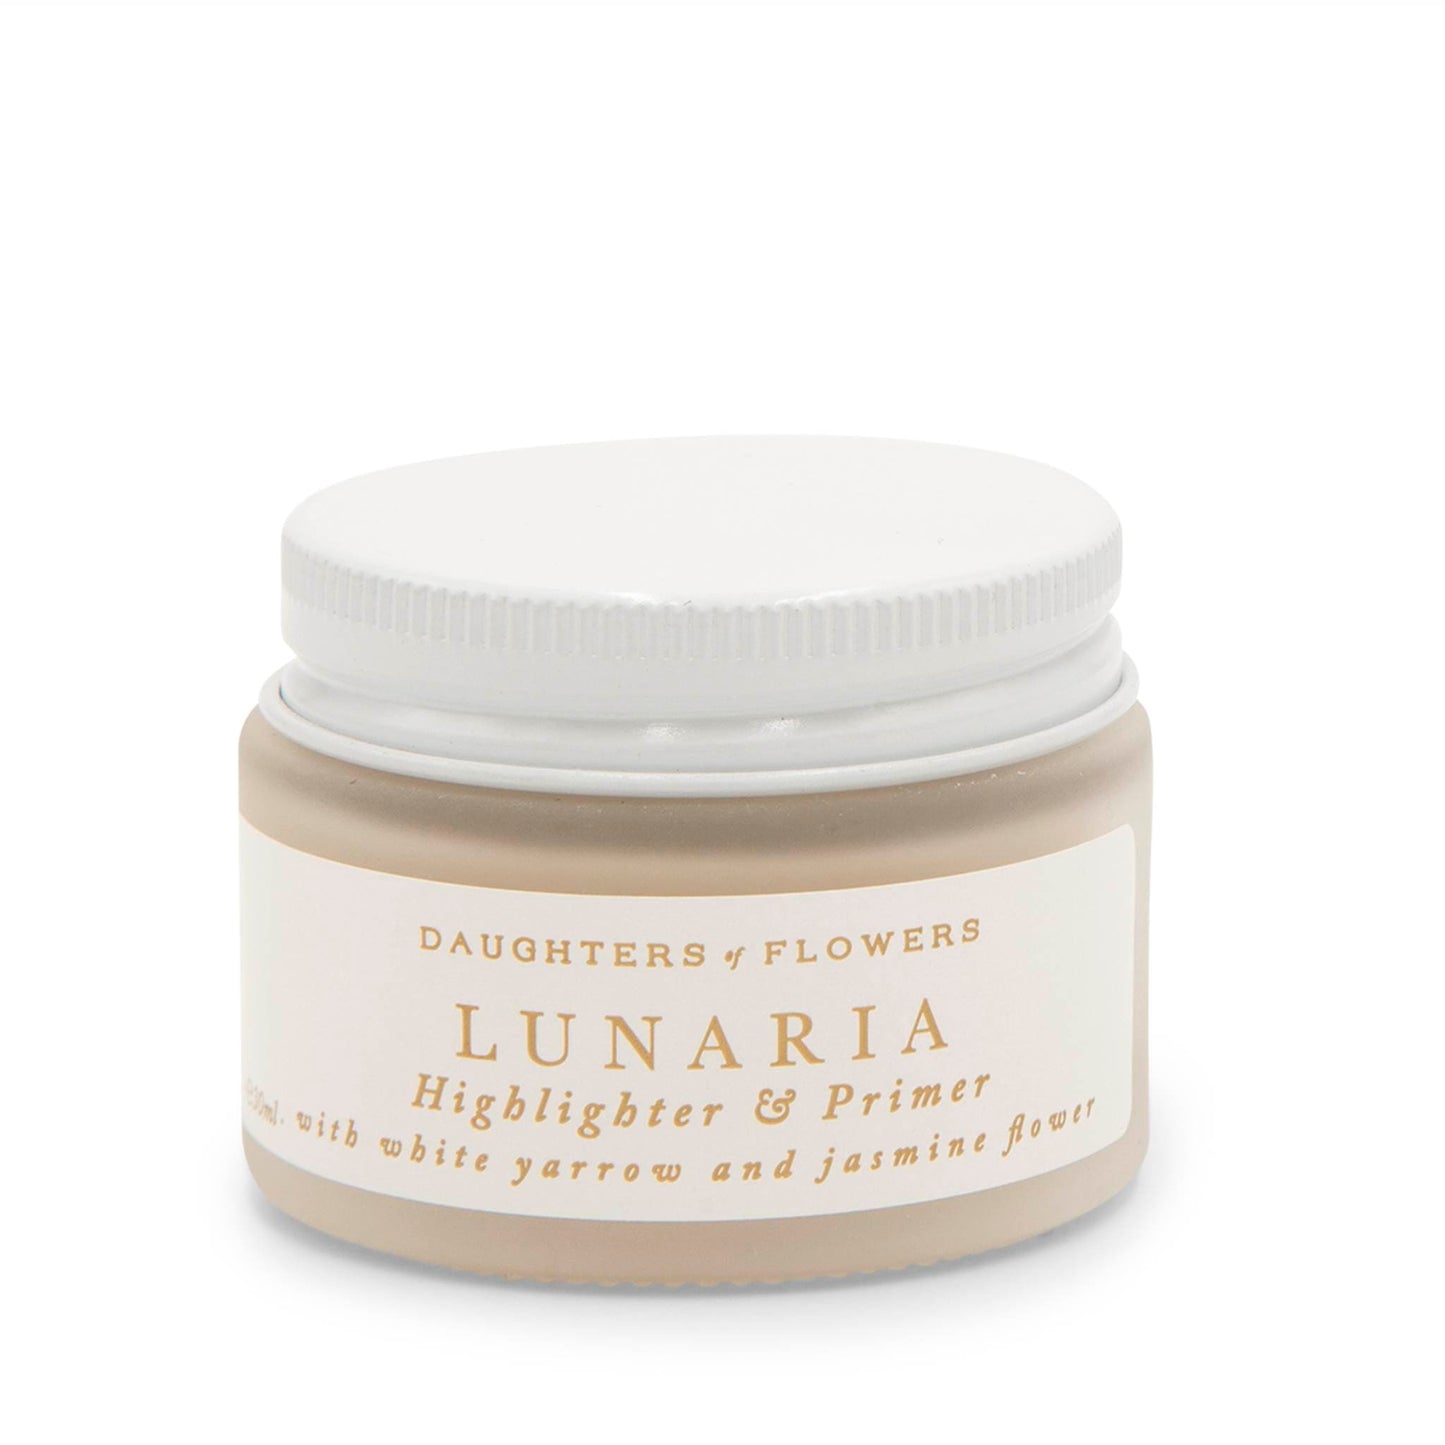 Daughters of Flowers Highlighters & Luminizers Lunaria Pearlescent Moonbeam Highlighter & Primer - Daughters of Flowers